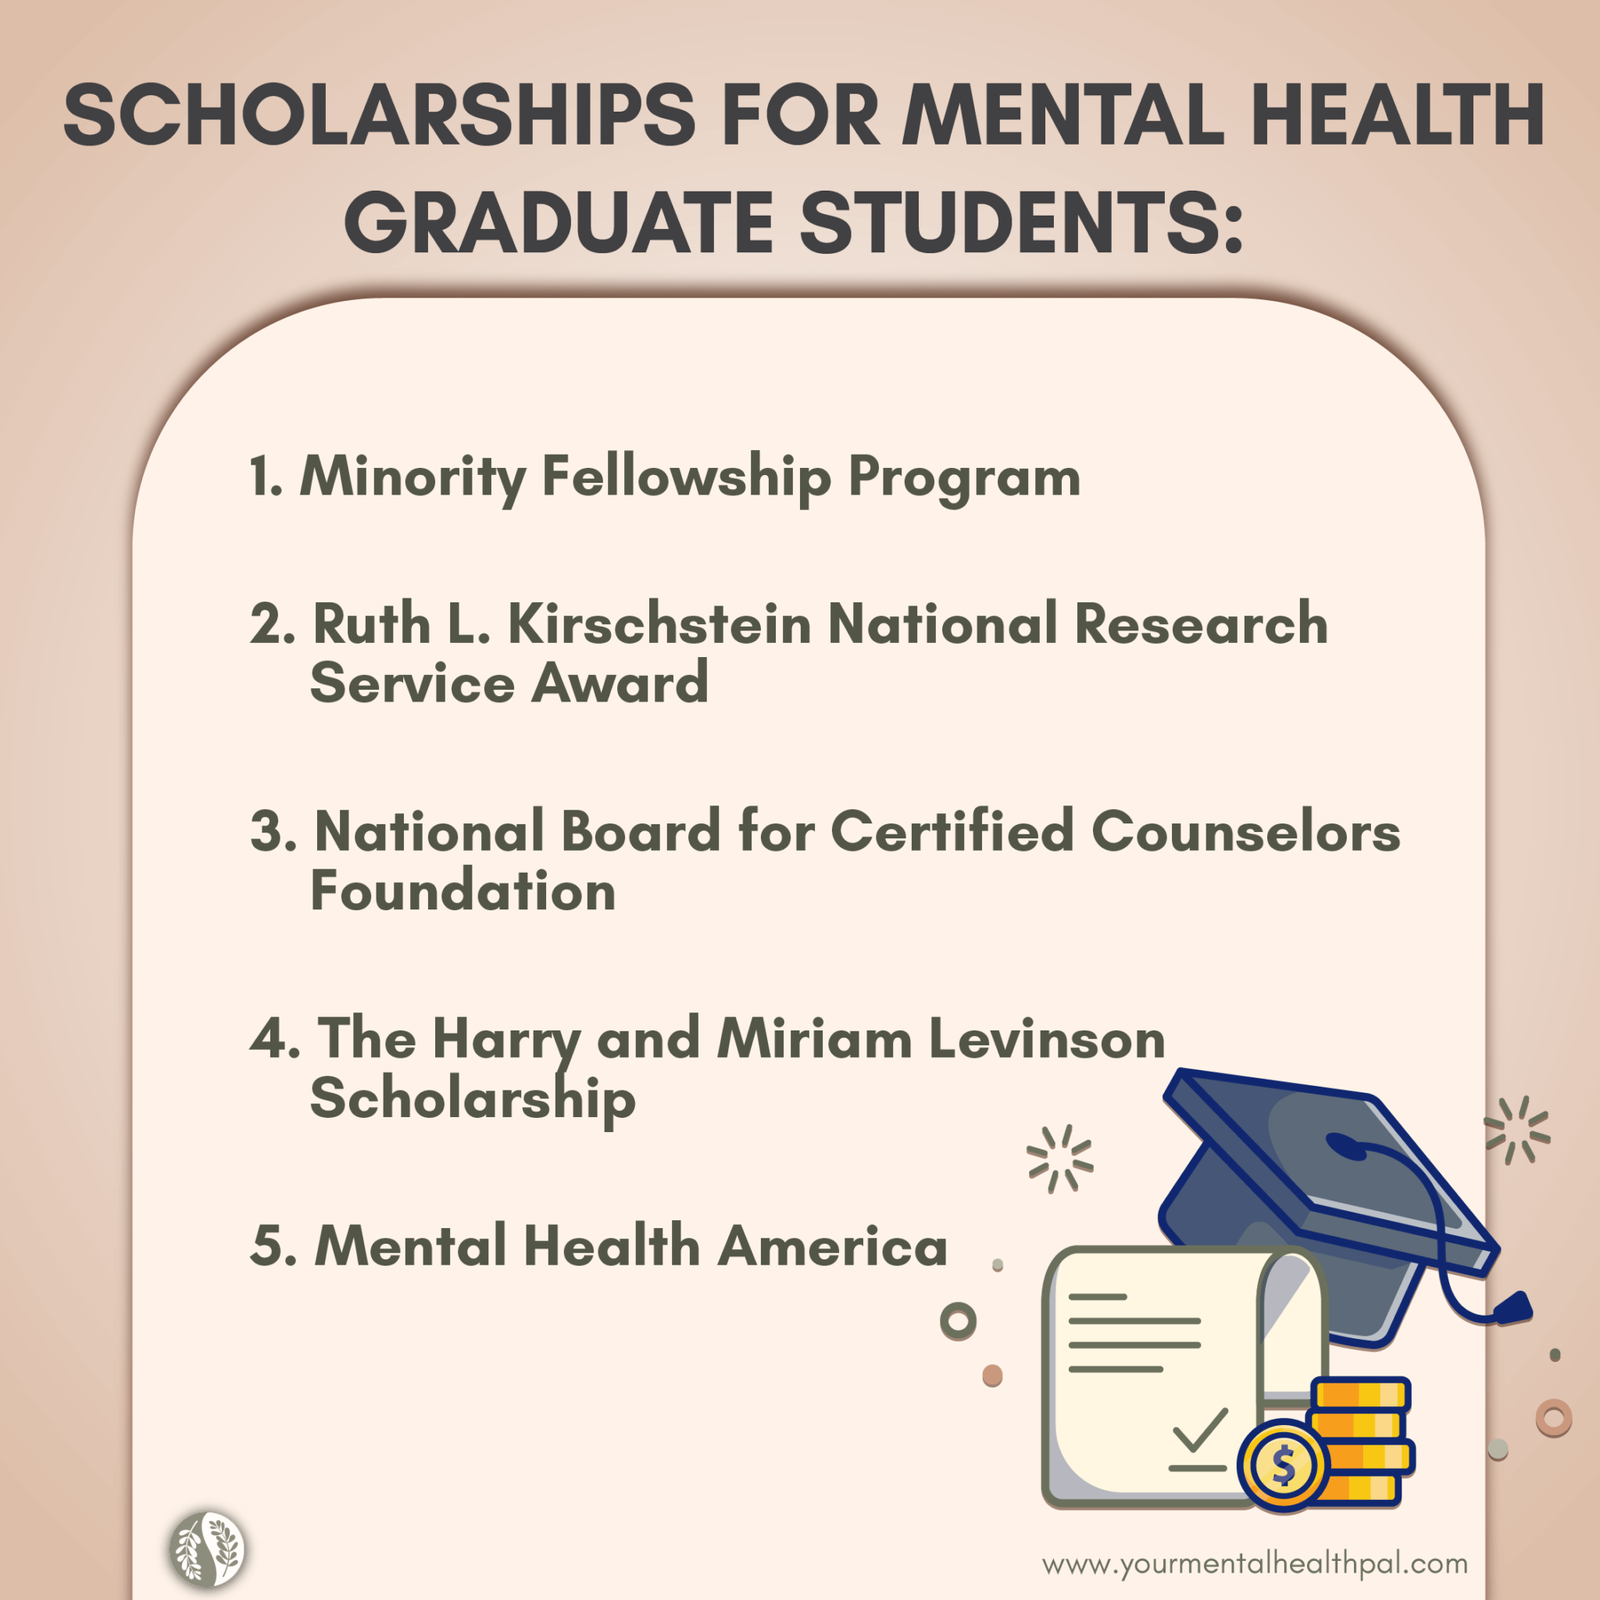 Access To Care With Mental Health Treatment Scholarships